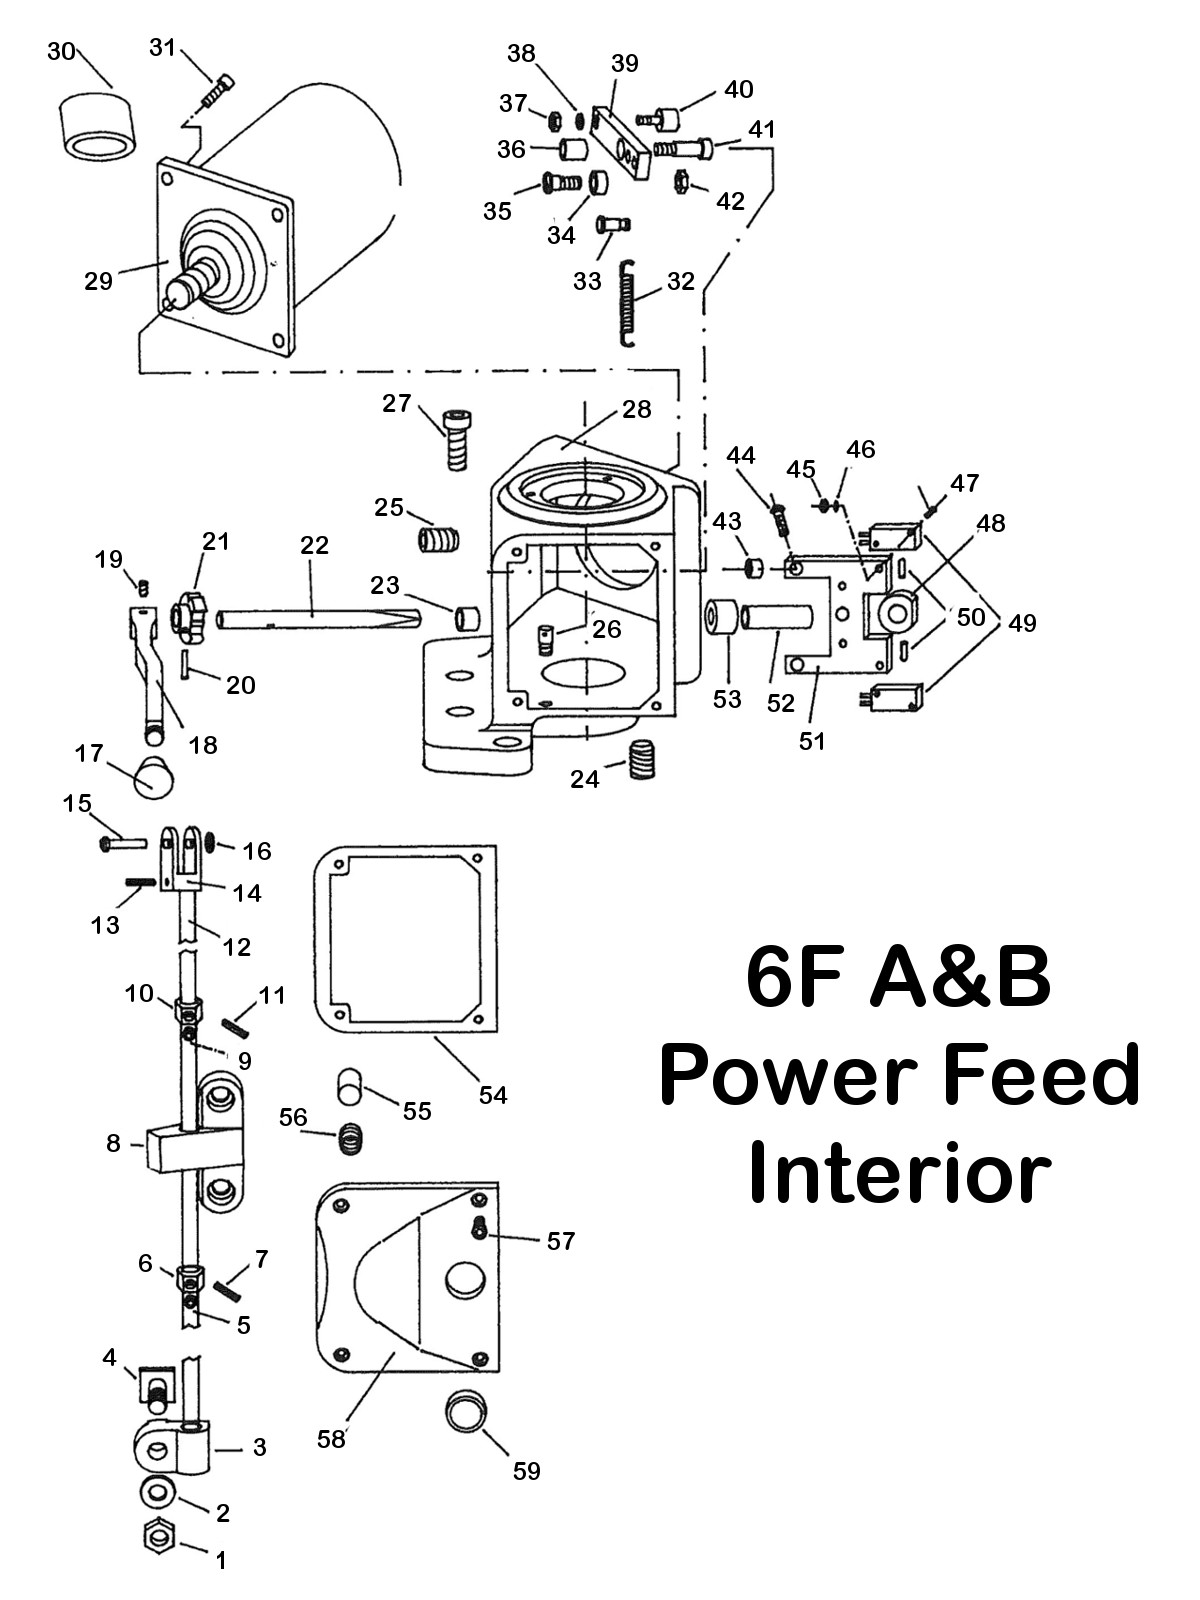 6F – A and B Power Feed Interior Breakdown